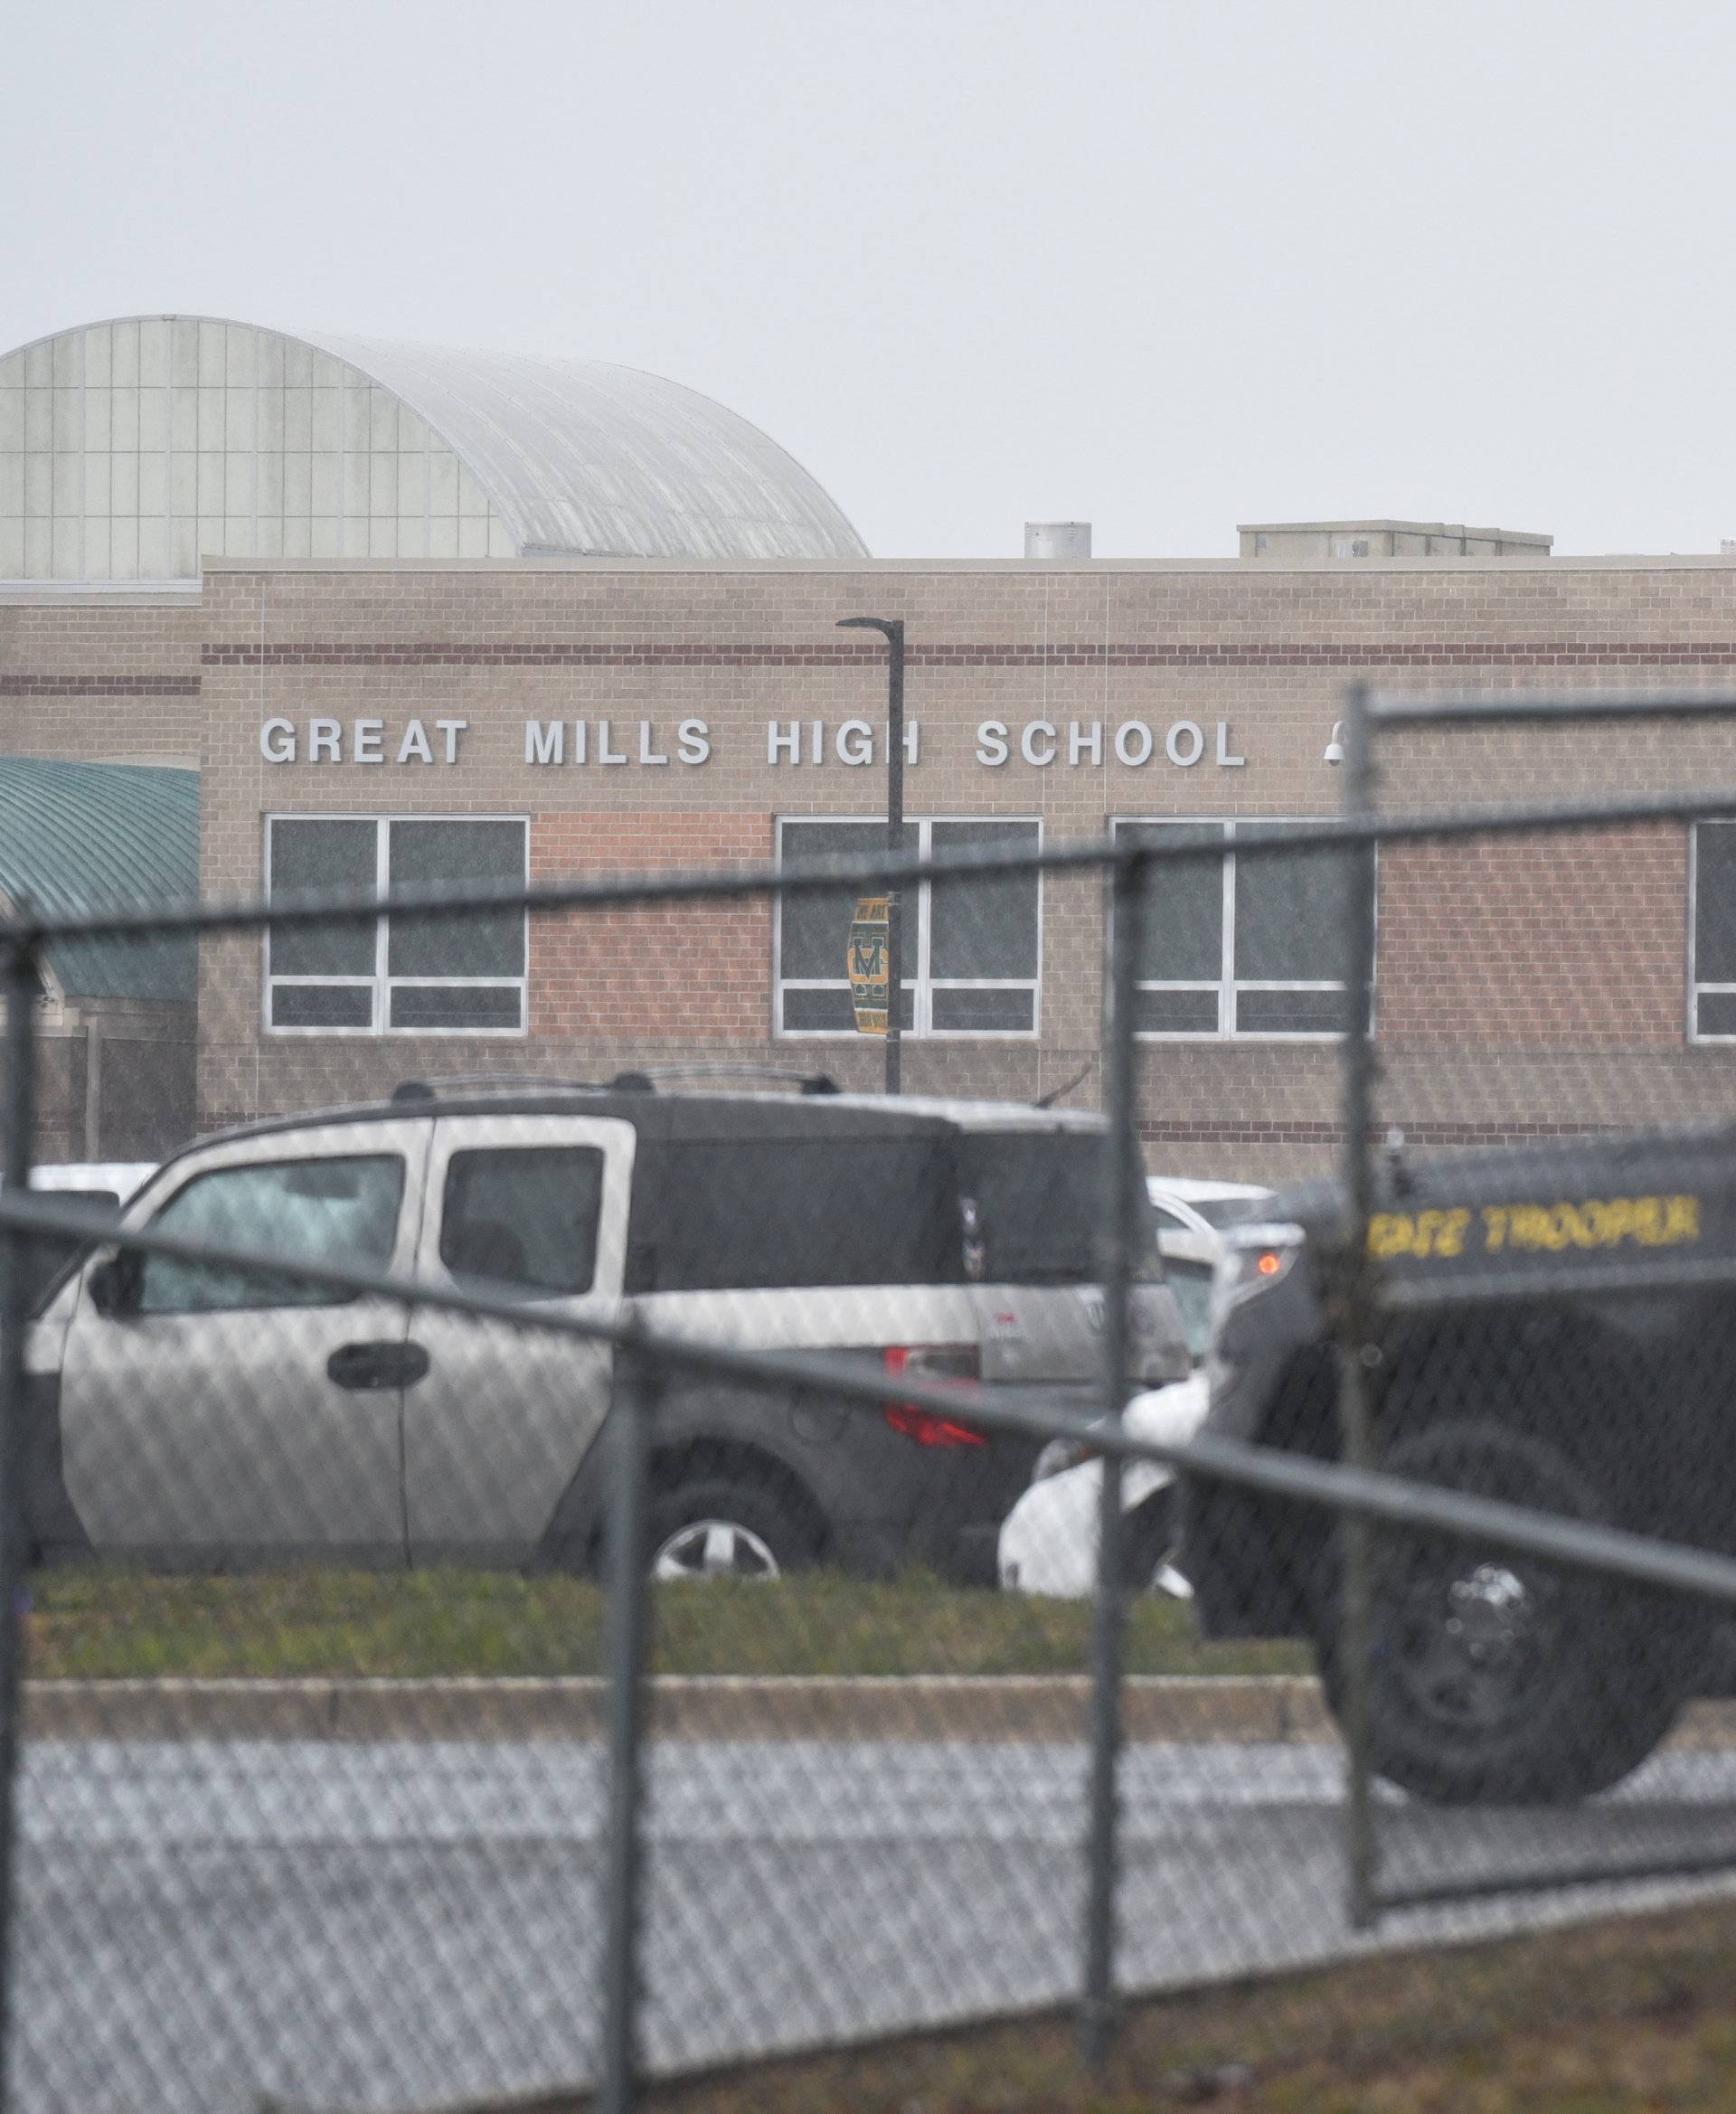 Emergency services and law enforcement vehicles are seen outside the Great Mills High School following a shooting on Tuesday morning in St. Mary's County, Maryland